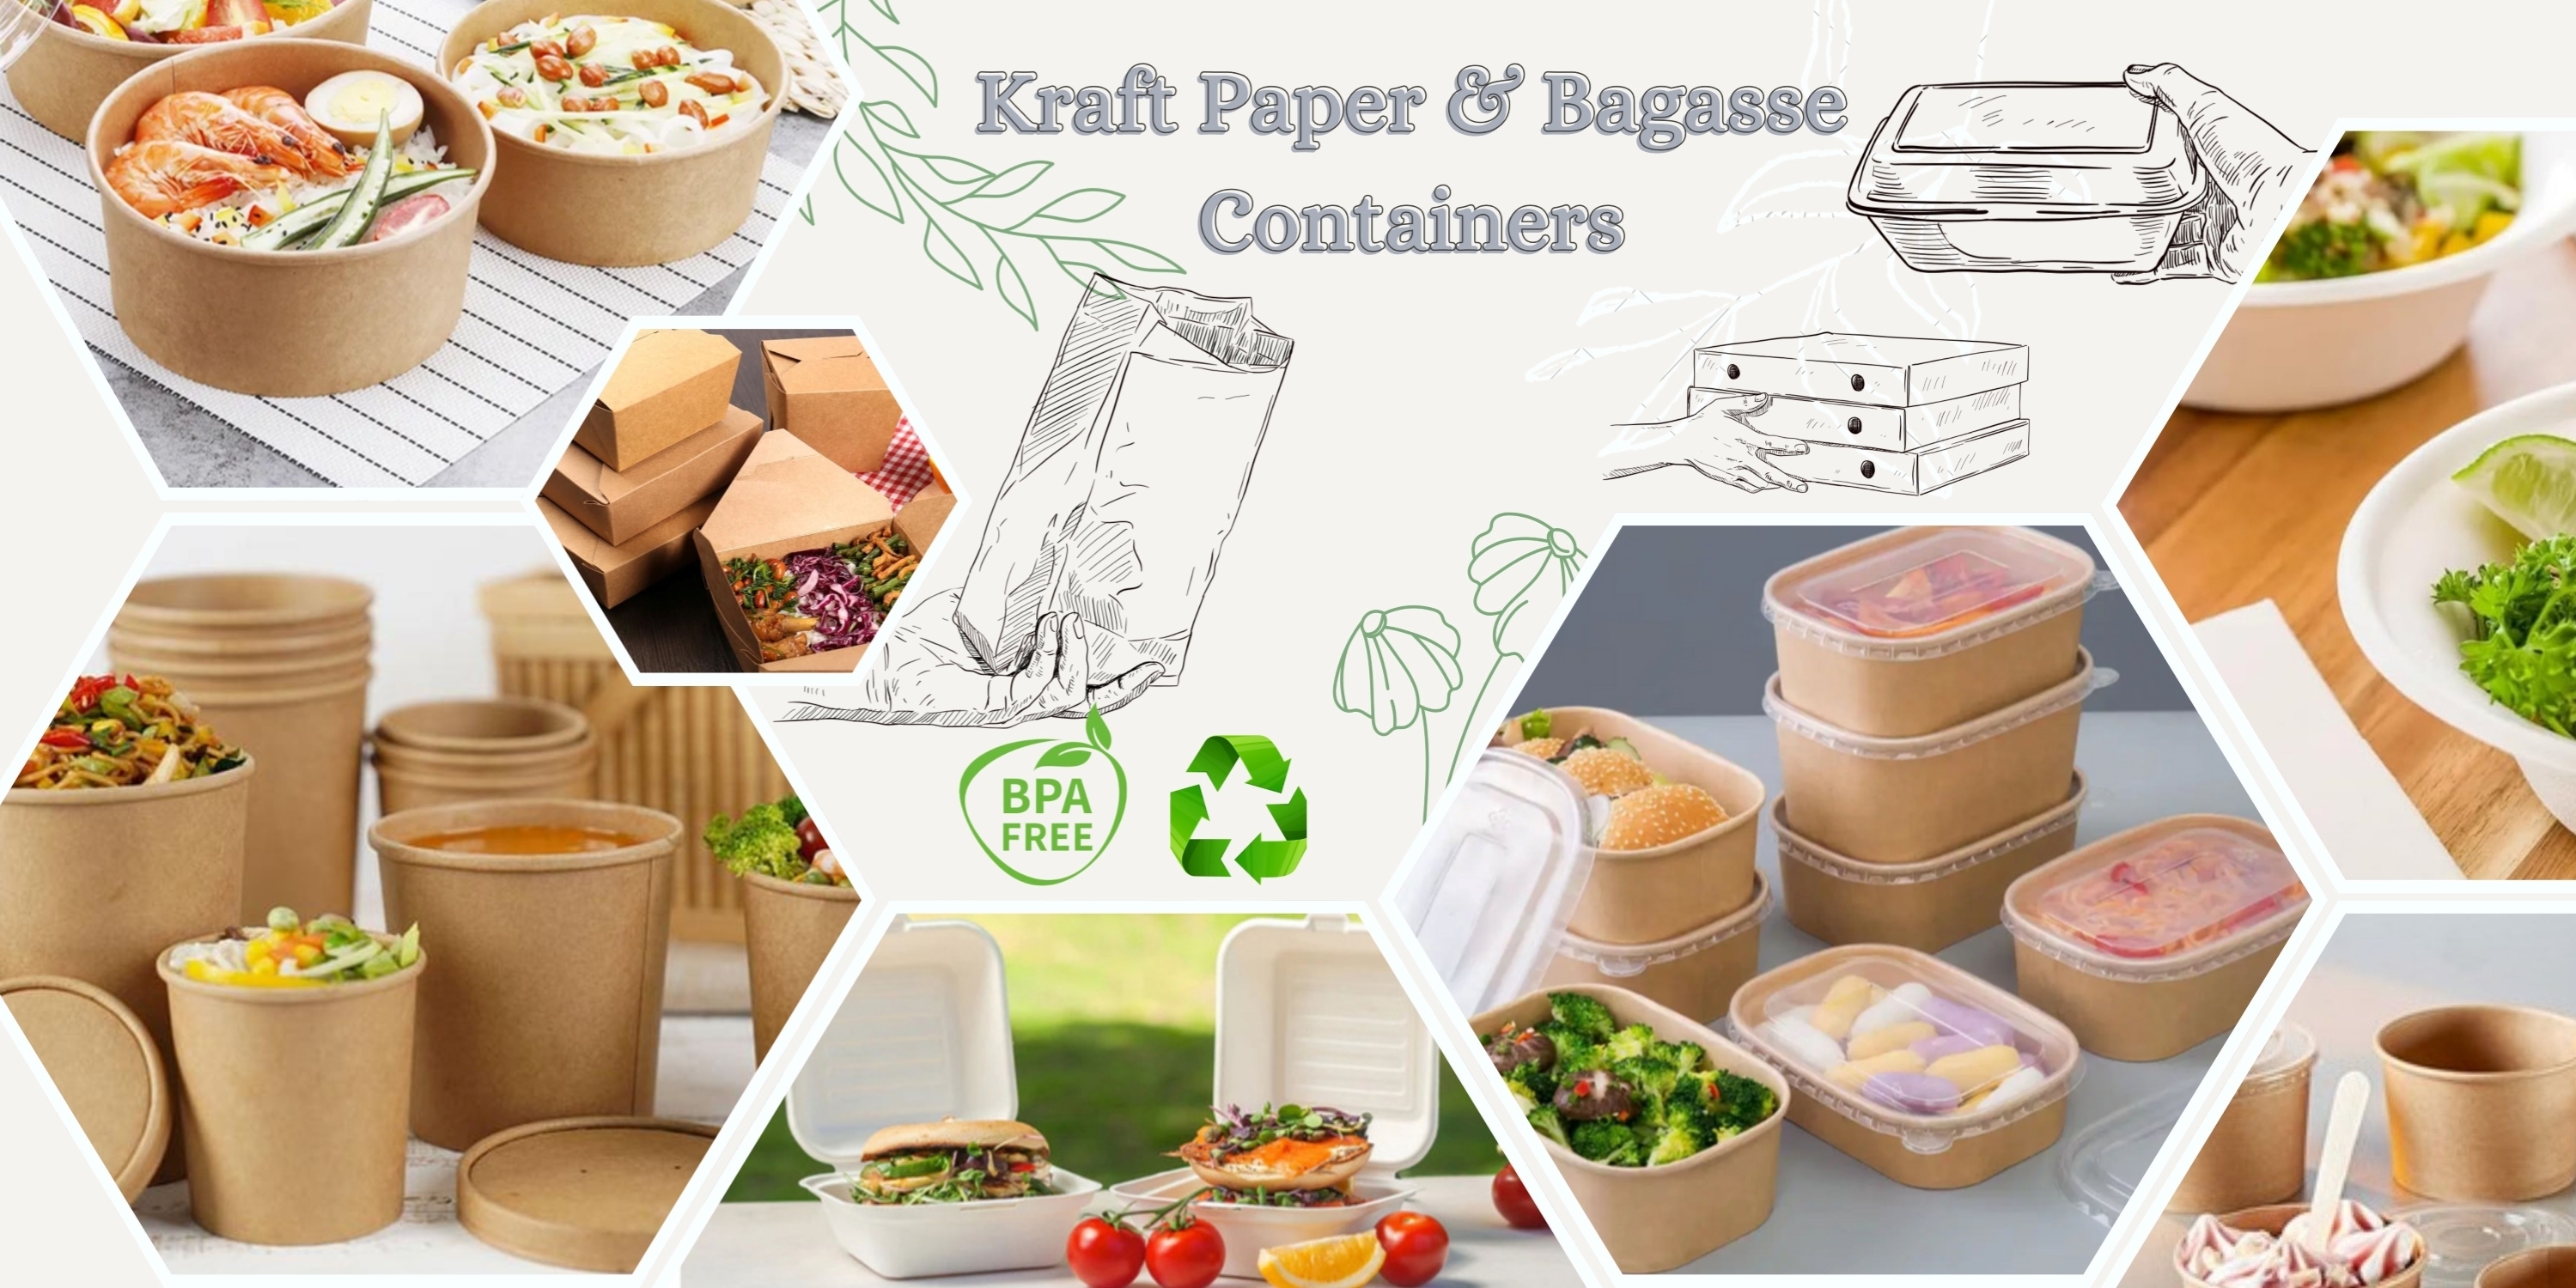 Paper & Bagasse Takeaway Containers